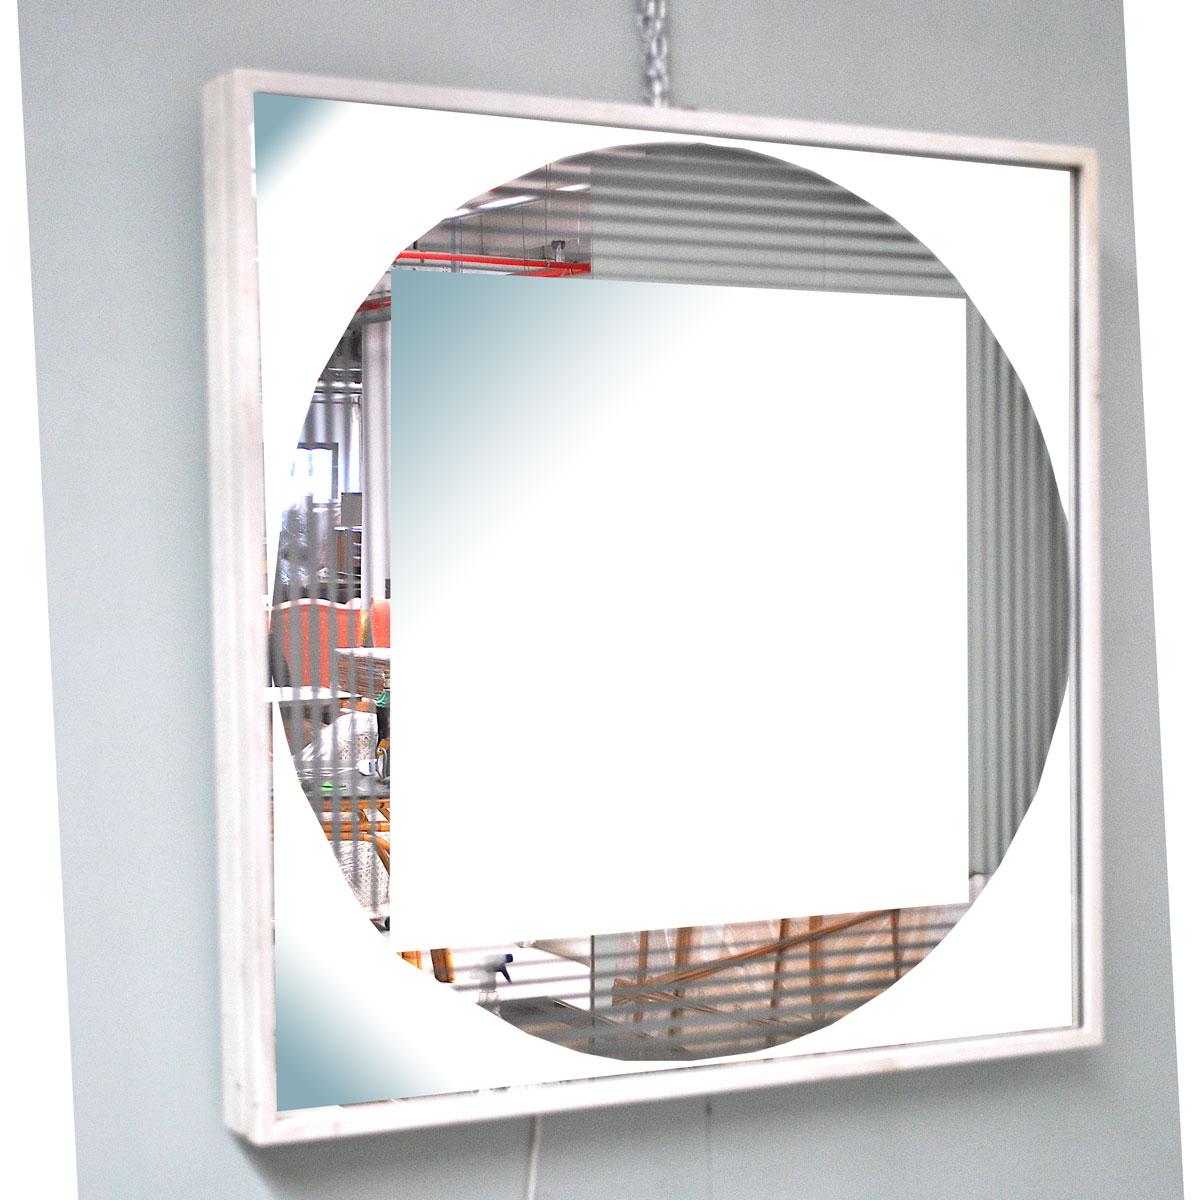 A wall mirror model Brama by Gianni Celada for Fontana Arte.
FontanaArte S.p.A. is an Italian company founded in Milan (as Fontana Arte) in 1932 by Luigi Fontana and Giò Ponti and specialised in the manufacture of glass and furnishing accessories.